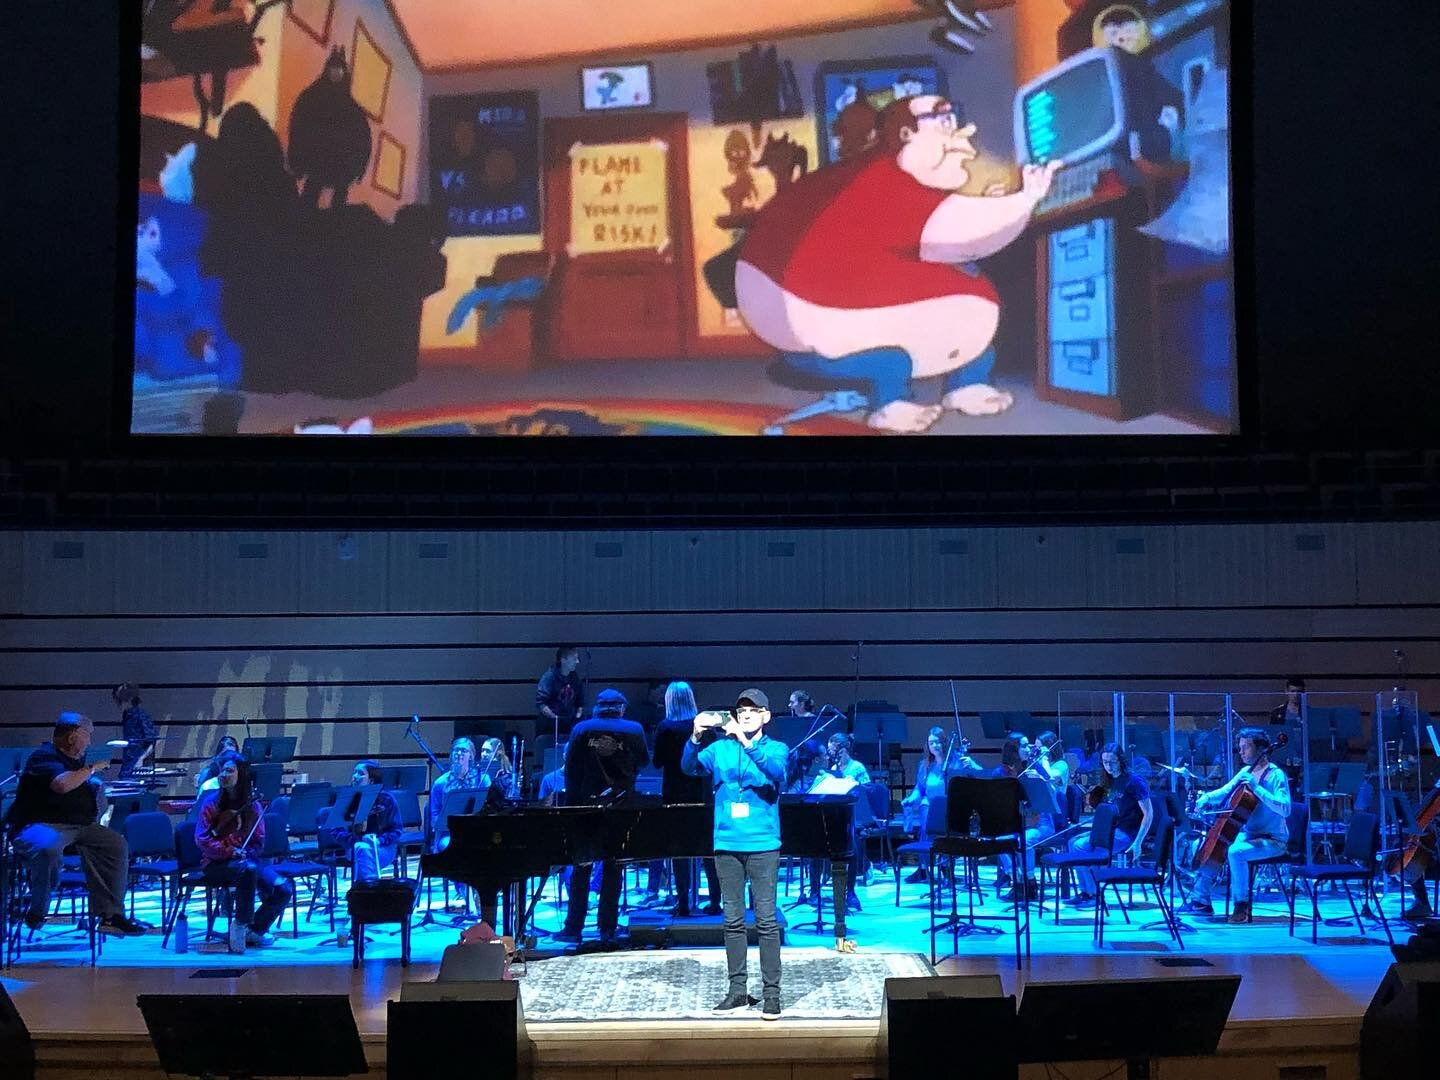 ANIMANIACS IN CONCERT is tonight! At-the-door tickets go on sale at 6, doors open at 7, and the concert begins at 8! Get ready for 2 hours of pure joy and nostalgia 🥳🤩
#animaniacsinconcert #animaniacs #soniccon2021 #soniccon #getexcited #getyourtic